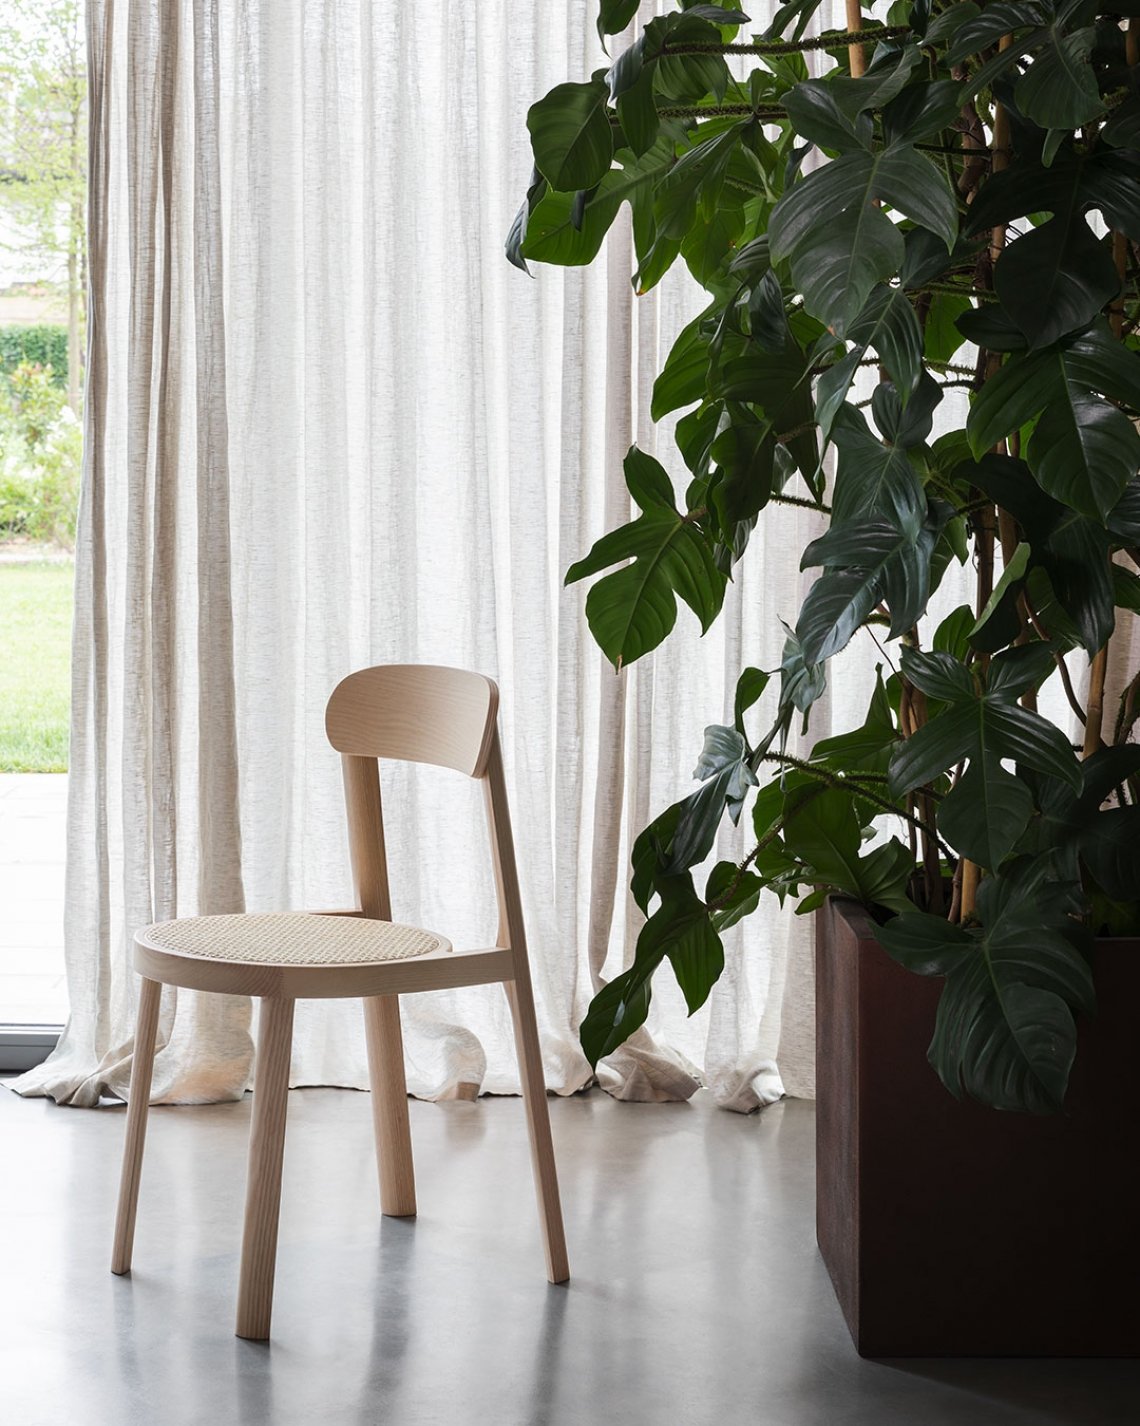 Brulla Chair from Miniforms, designed by Skrivo